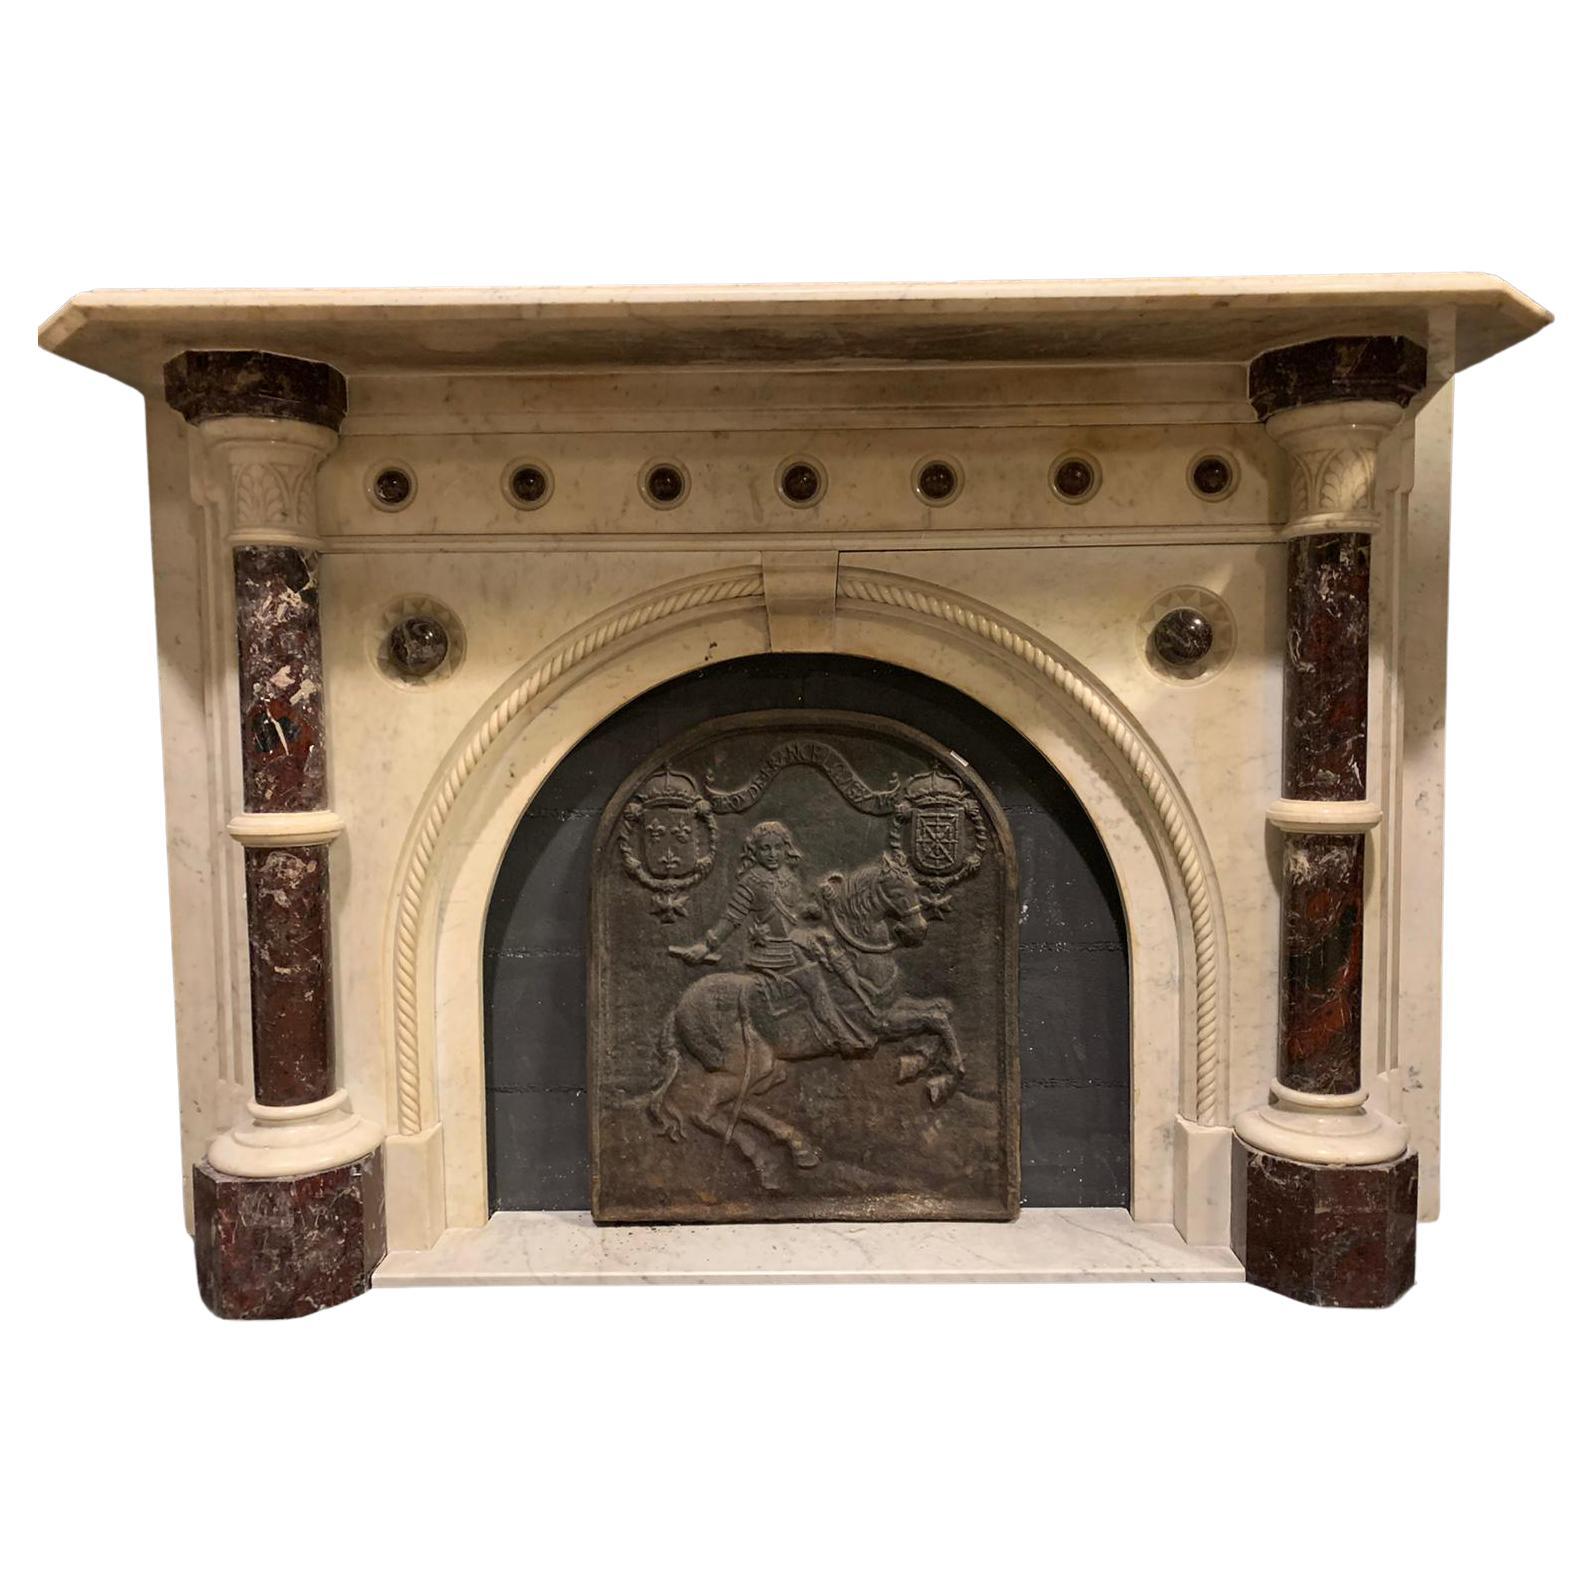 Antique Fireplace Mantle in White and Red Marble, Inlaid and Carved, '800 Italy